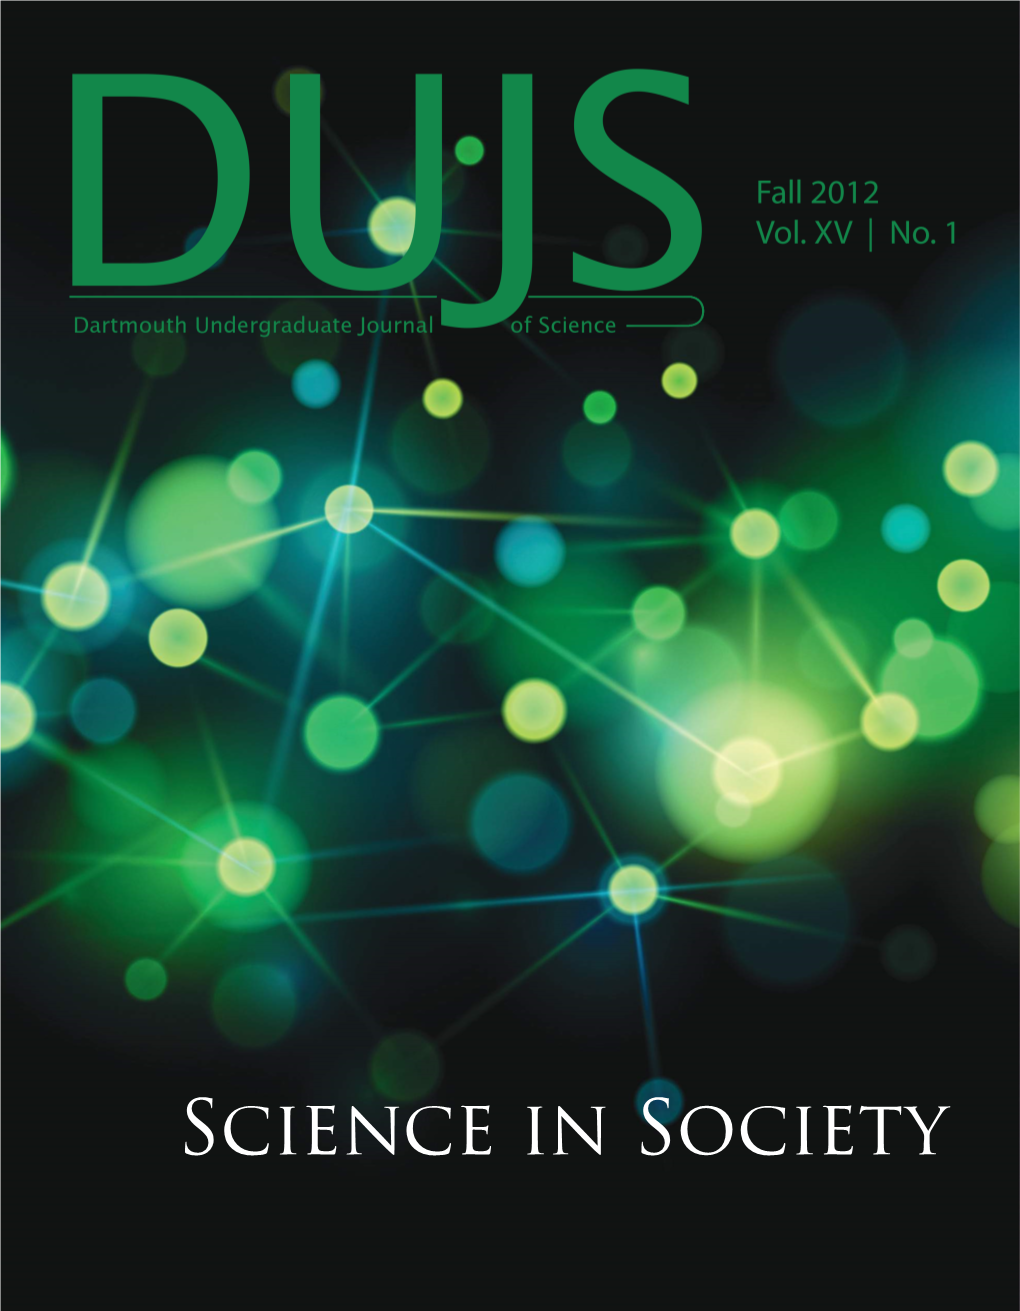 Science in Society COVER IMAGE SUBMISSIONS ABOUT US